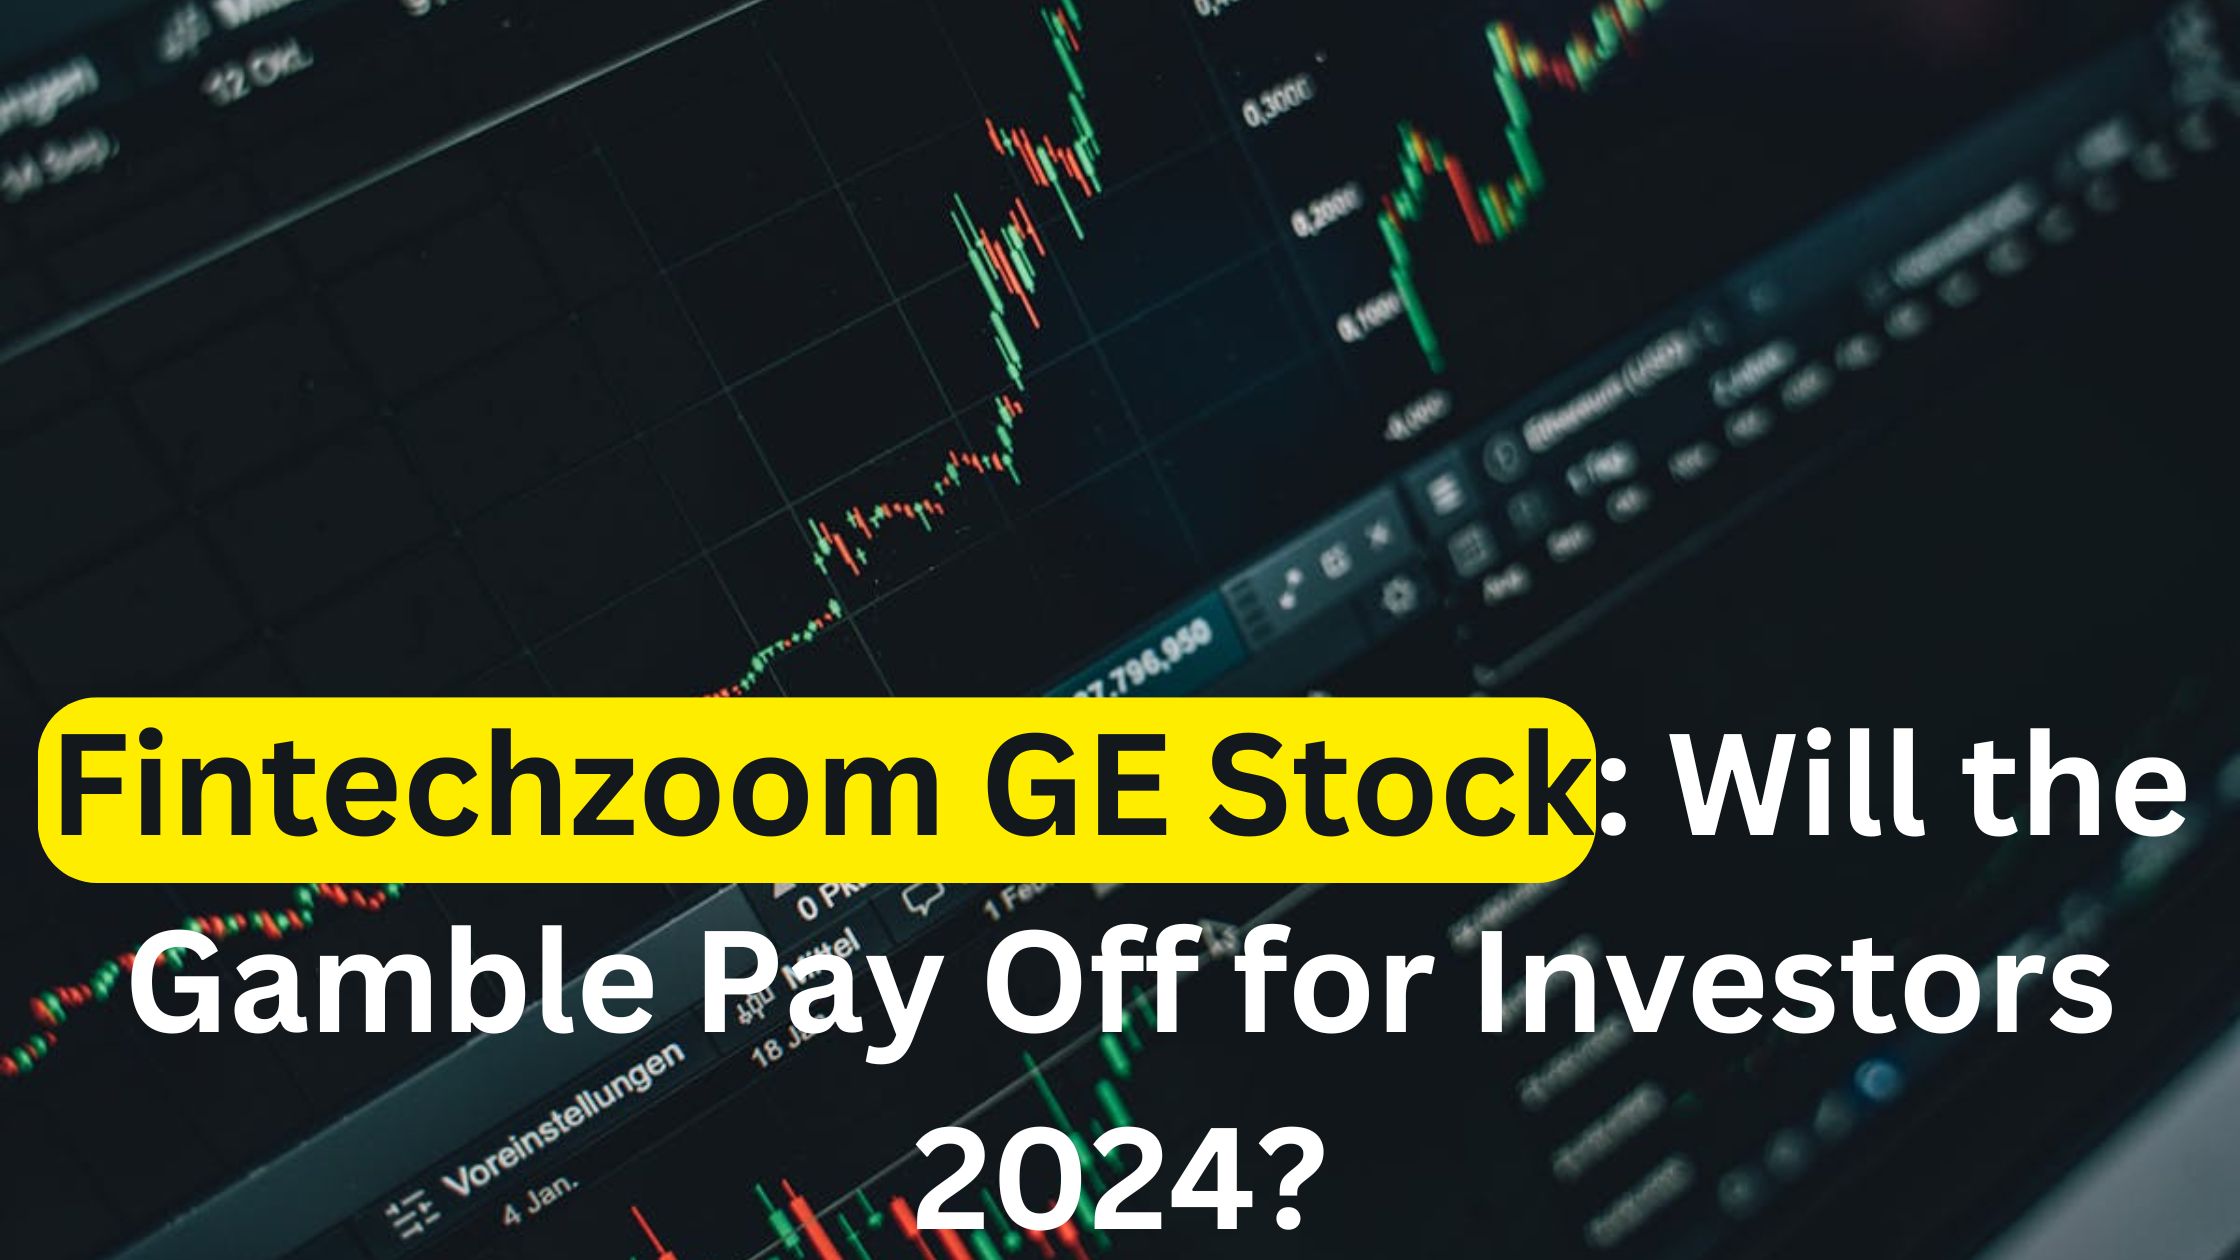 Fintechzoom GE Stock: Will the Gamble Pay Off for Investors 2024?